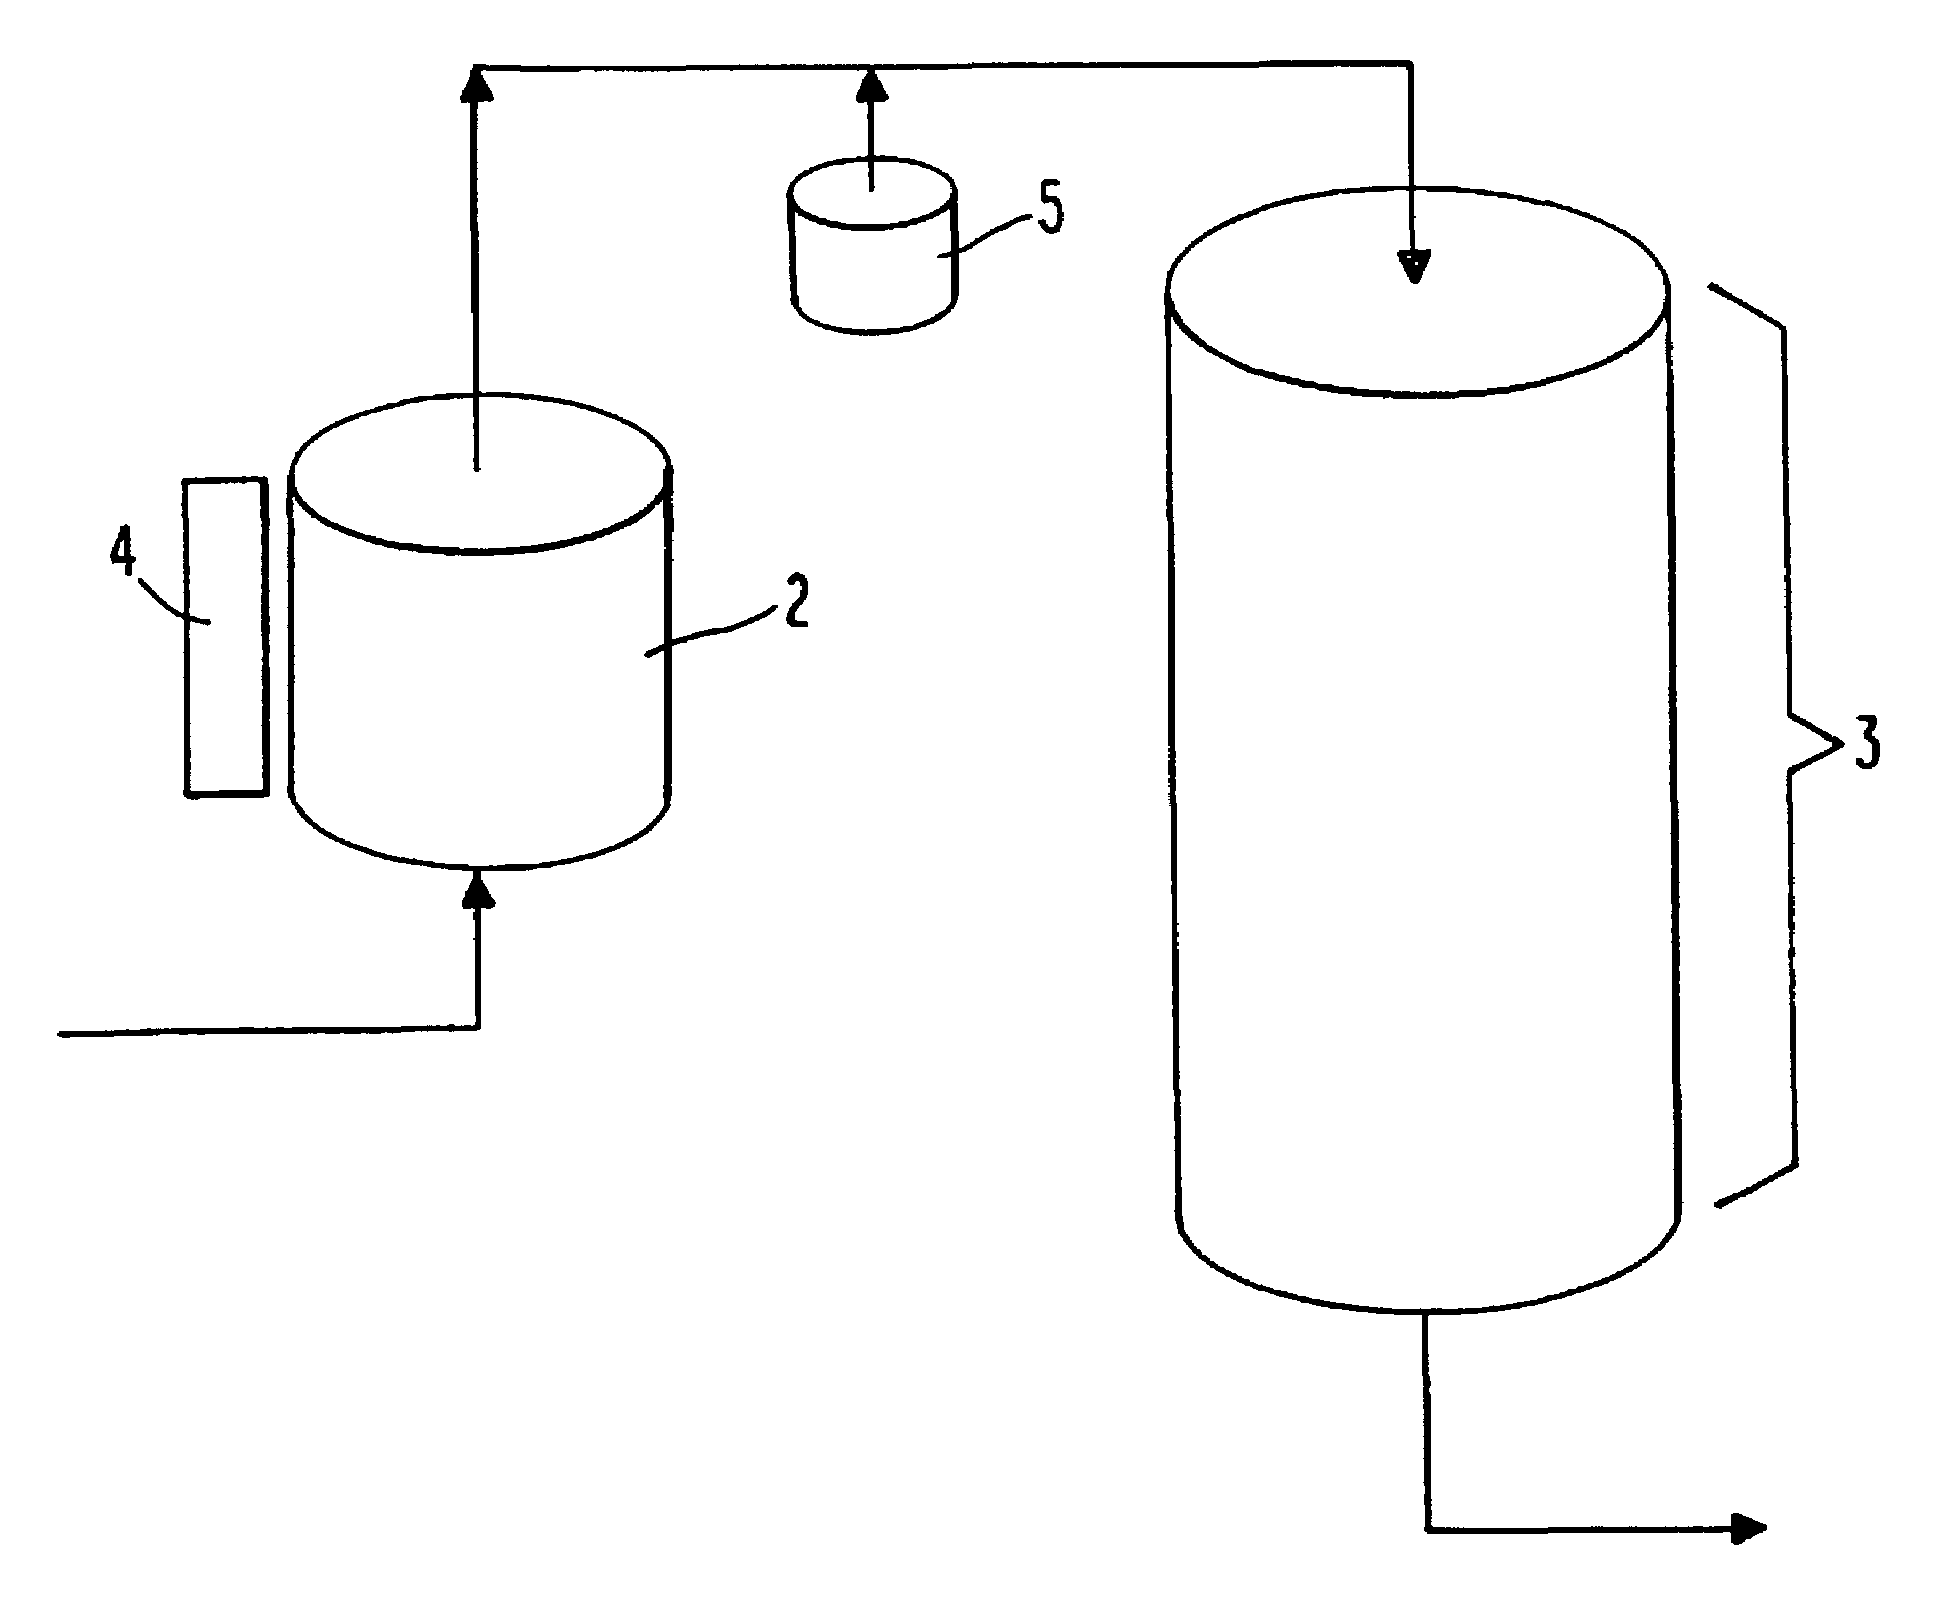 Iron powder and sand filtration process for treatment of water contaminated with heavy metals and organic compounds